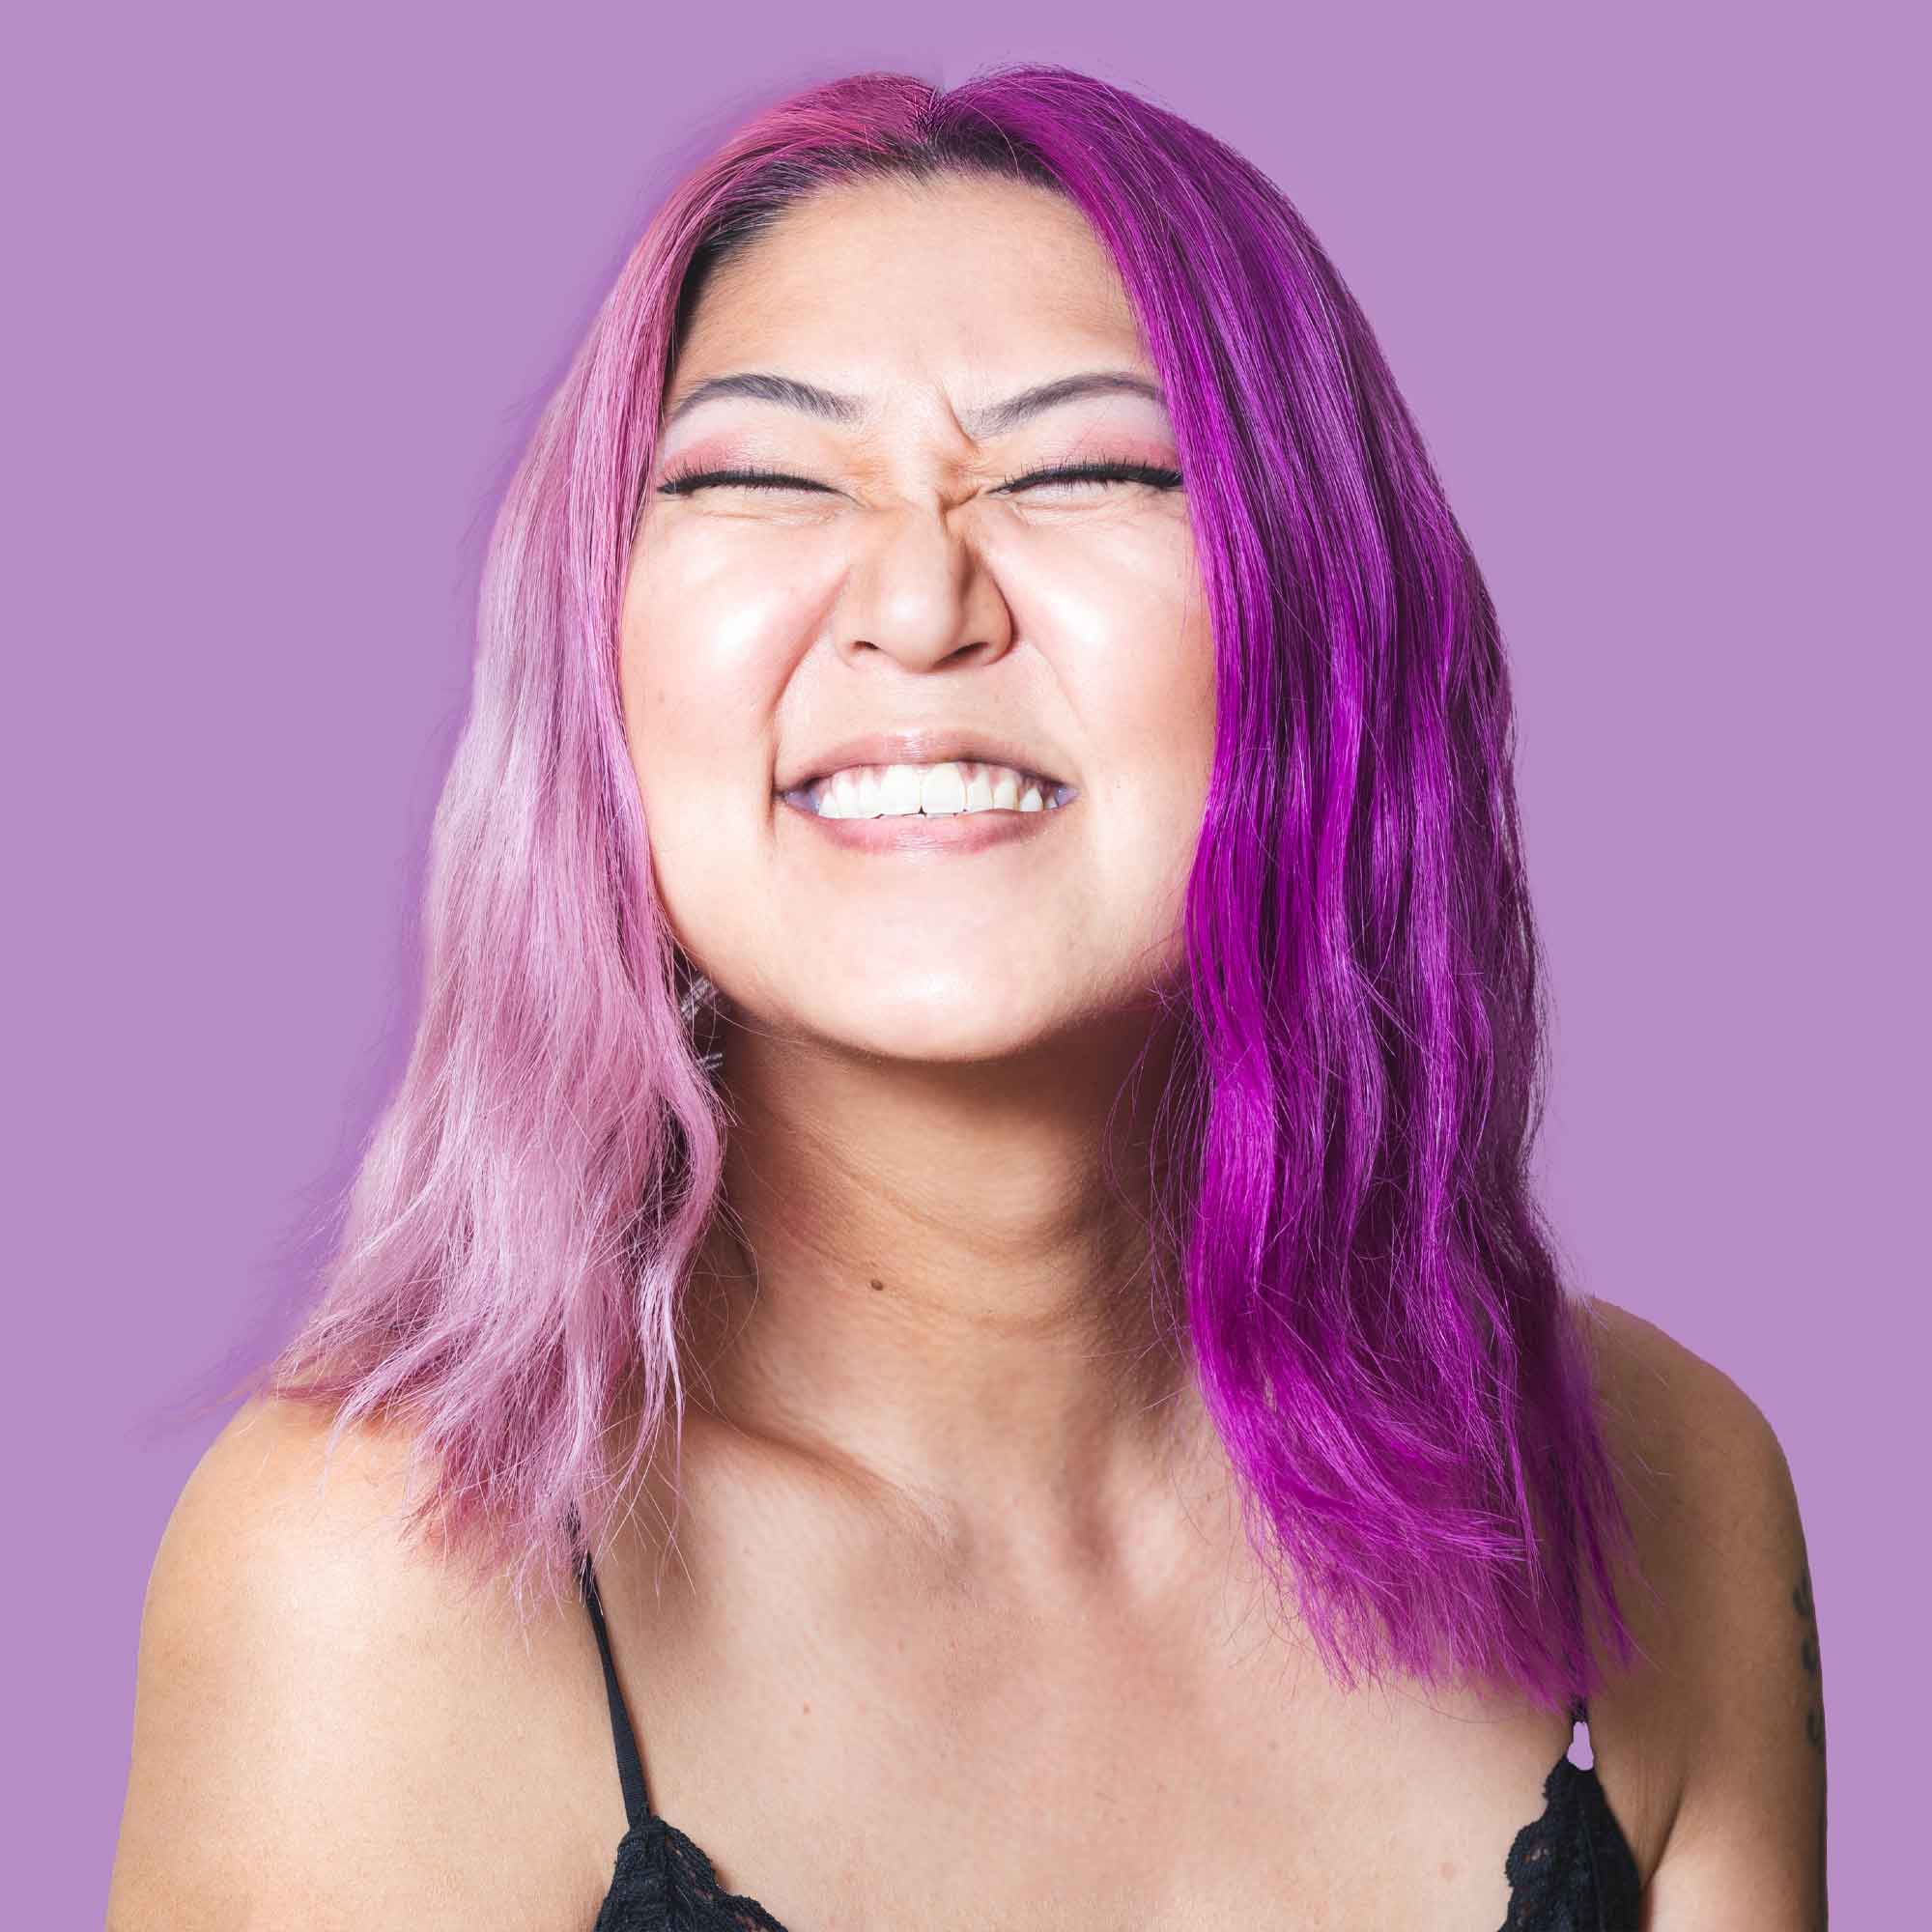 Itching For a New 'Do? Dye Your Hair With These Fun Semi-Permanent Colours  - POPSUGAR Australia